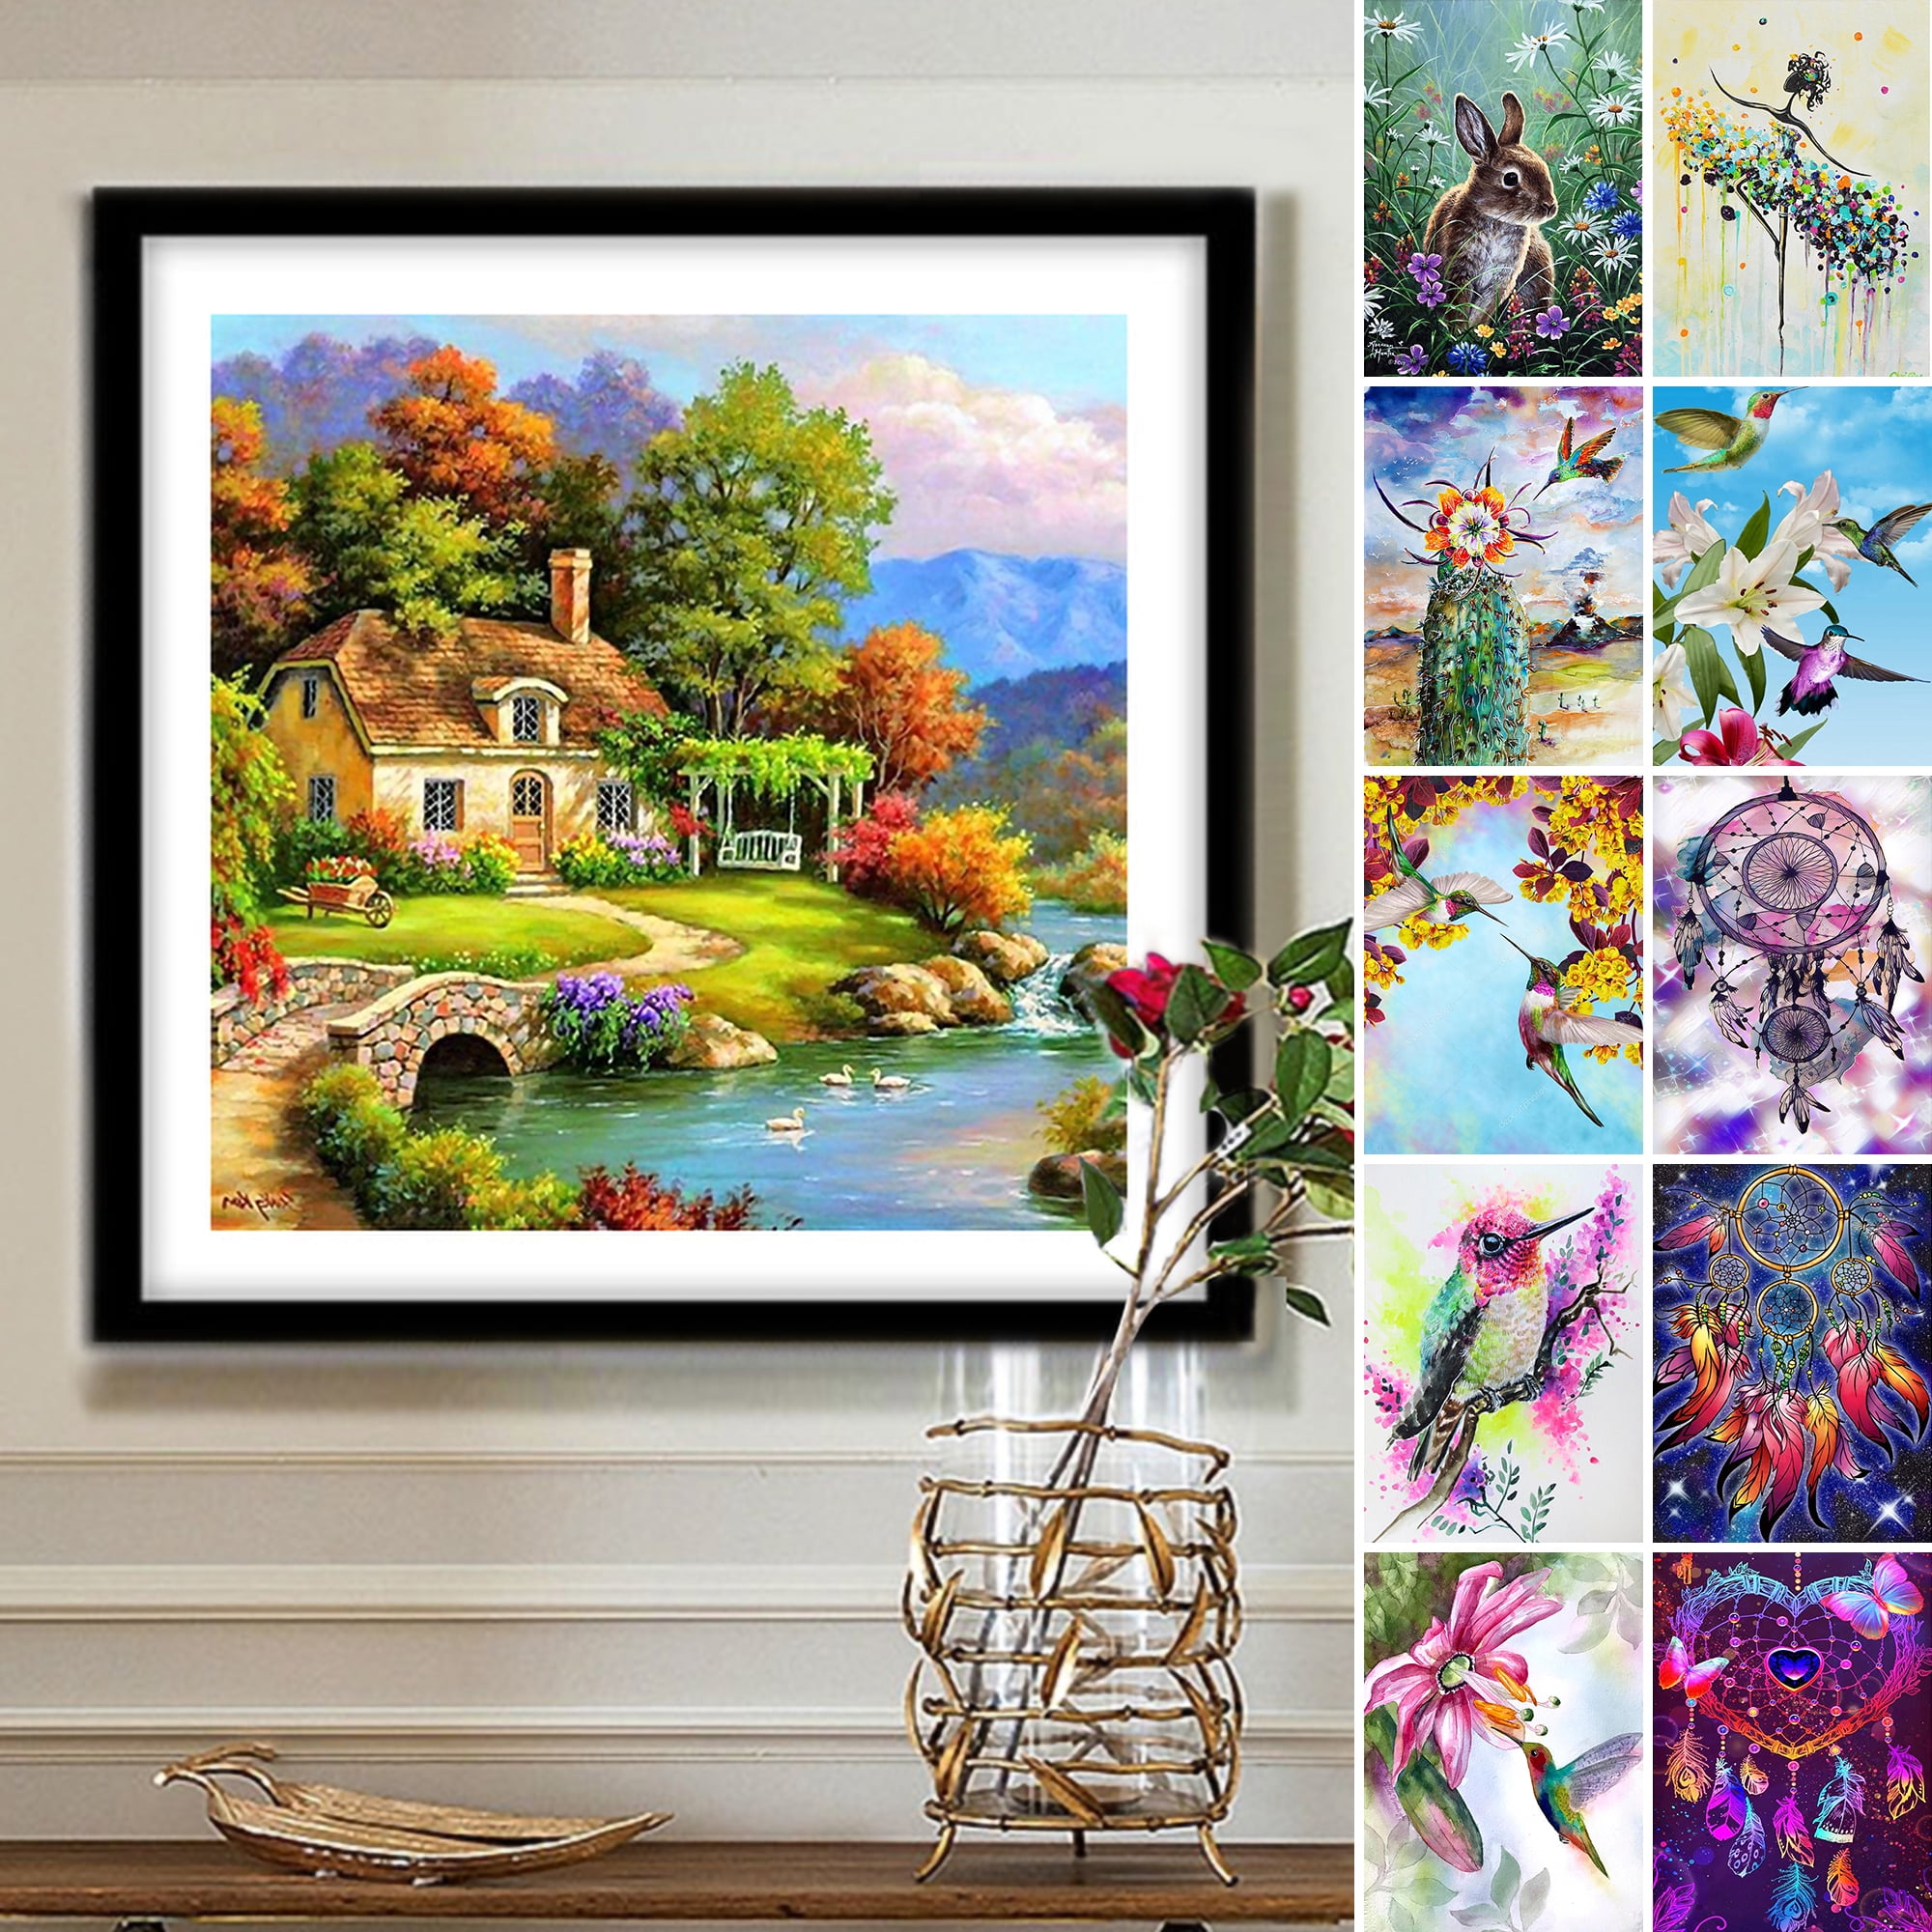 5D Diamond Painting Embroidery Craft Cross Stitch Pictures Art Kits Home Decor~